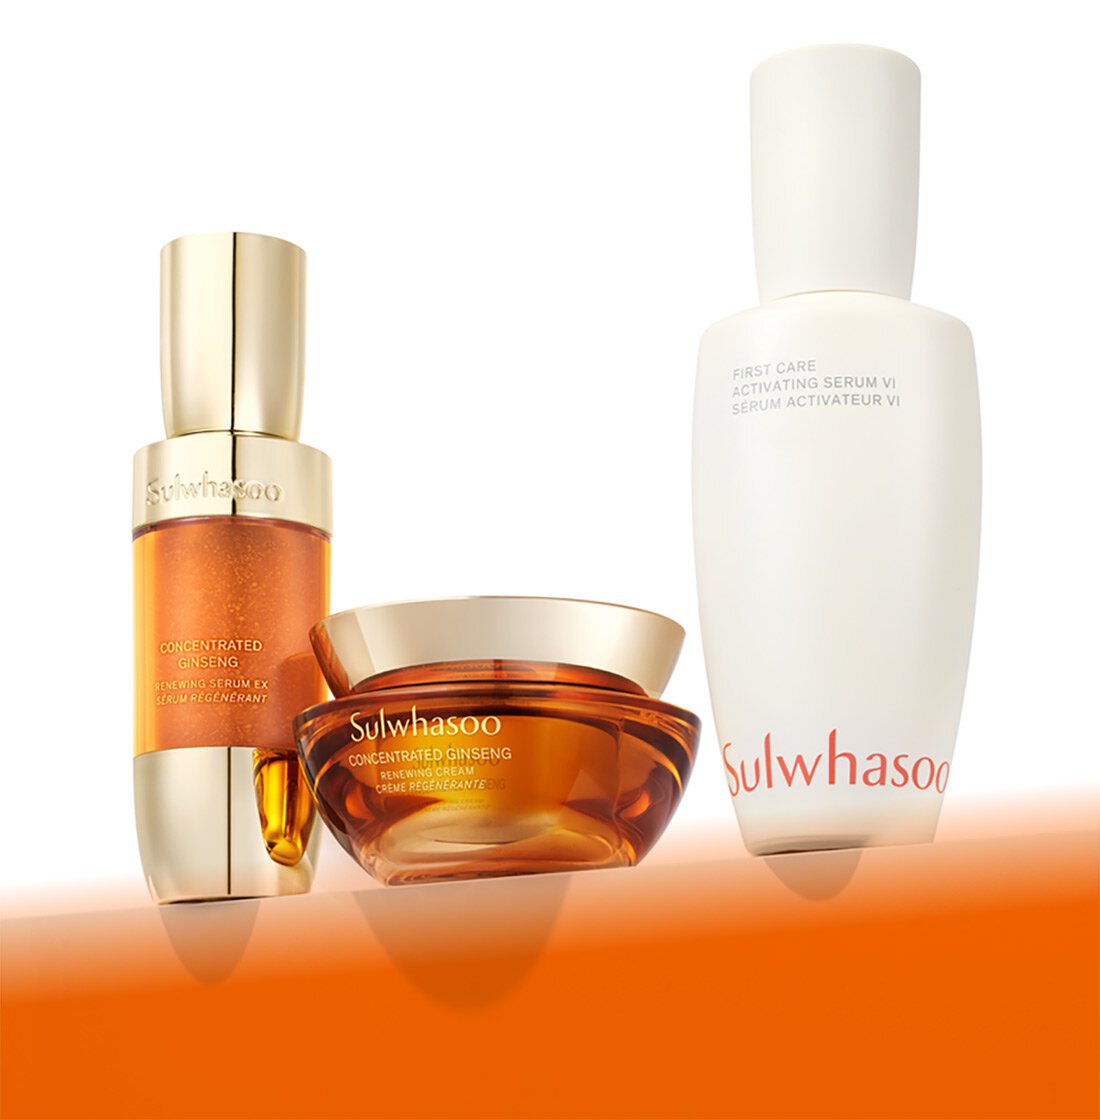 Concentrated Ginseng Renewing Serum, Concentrated Ginseng Renewing Cream, First care Activating Serum